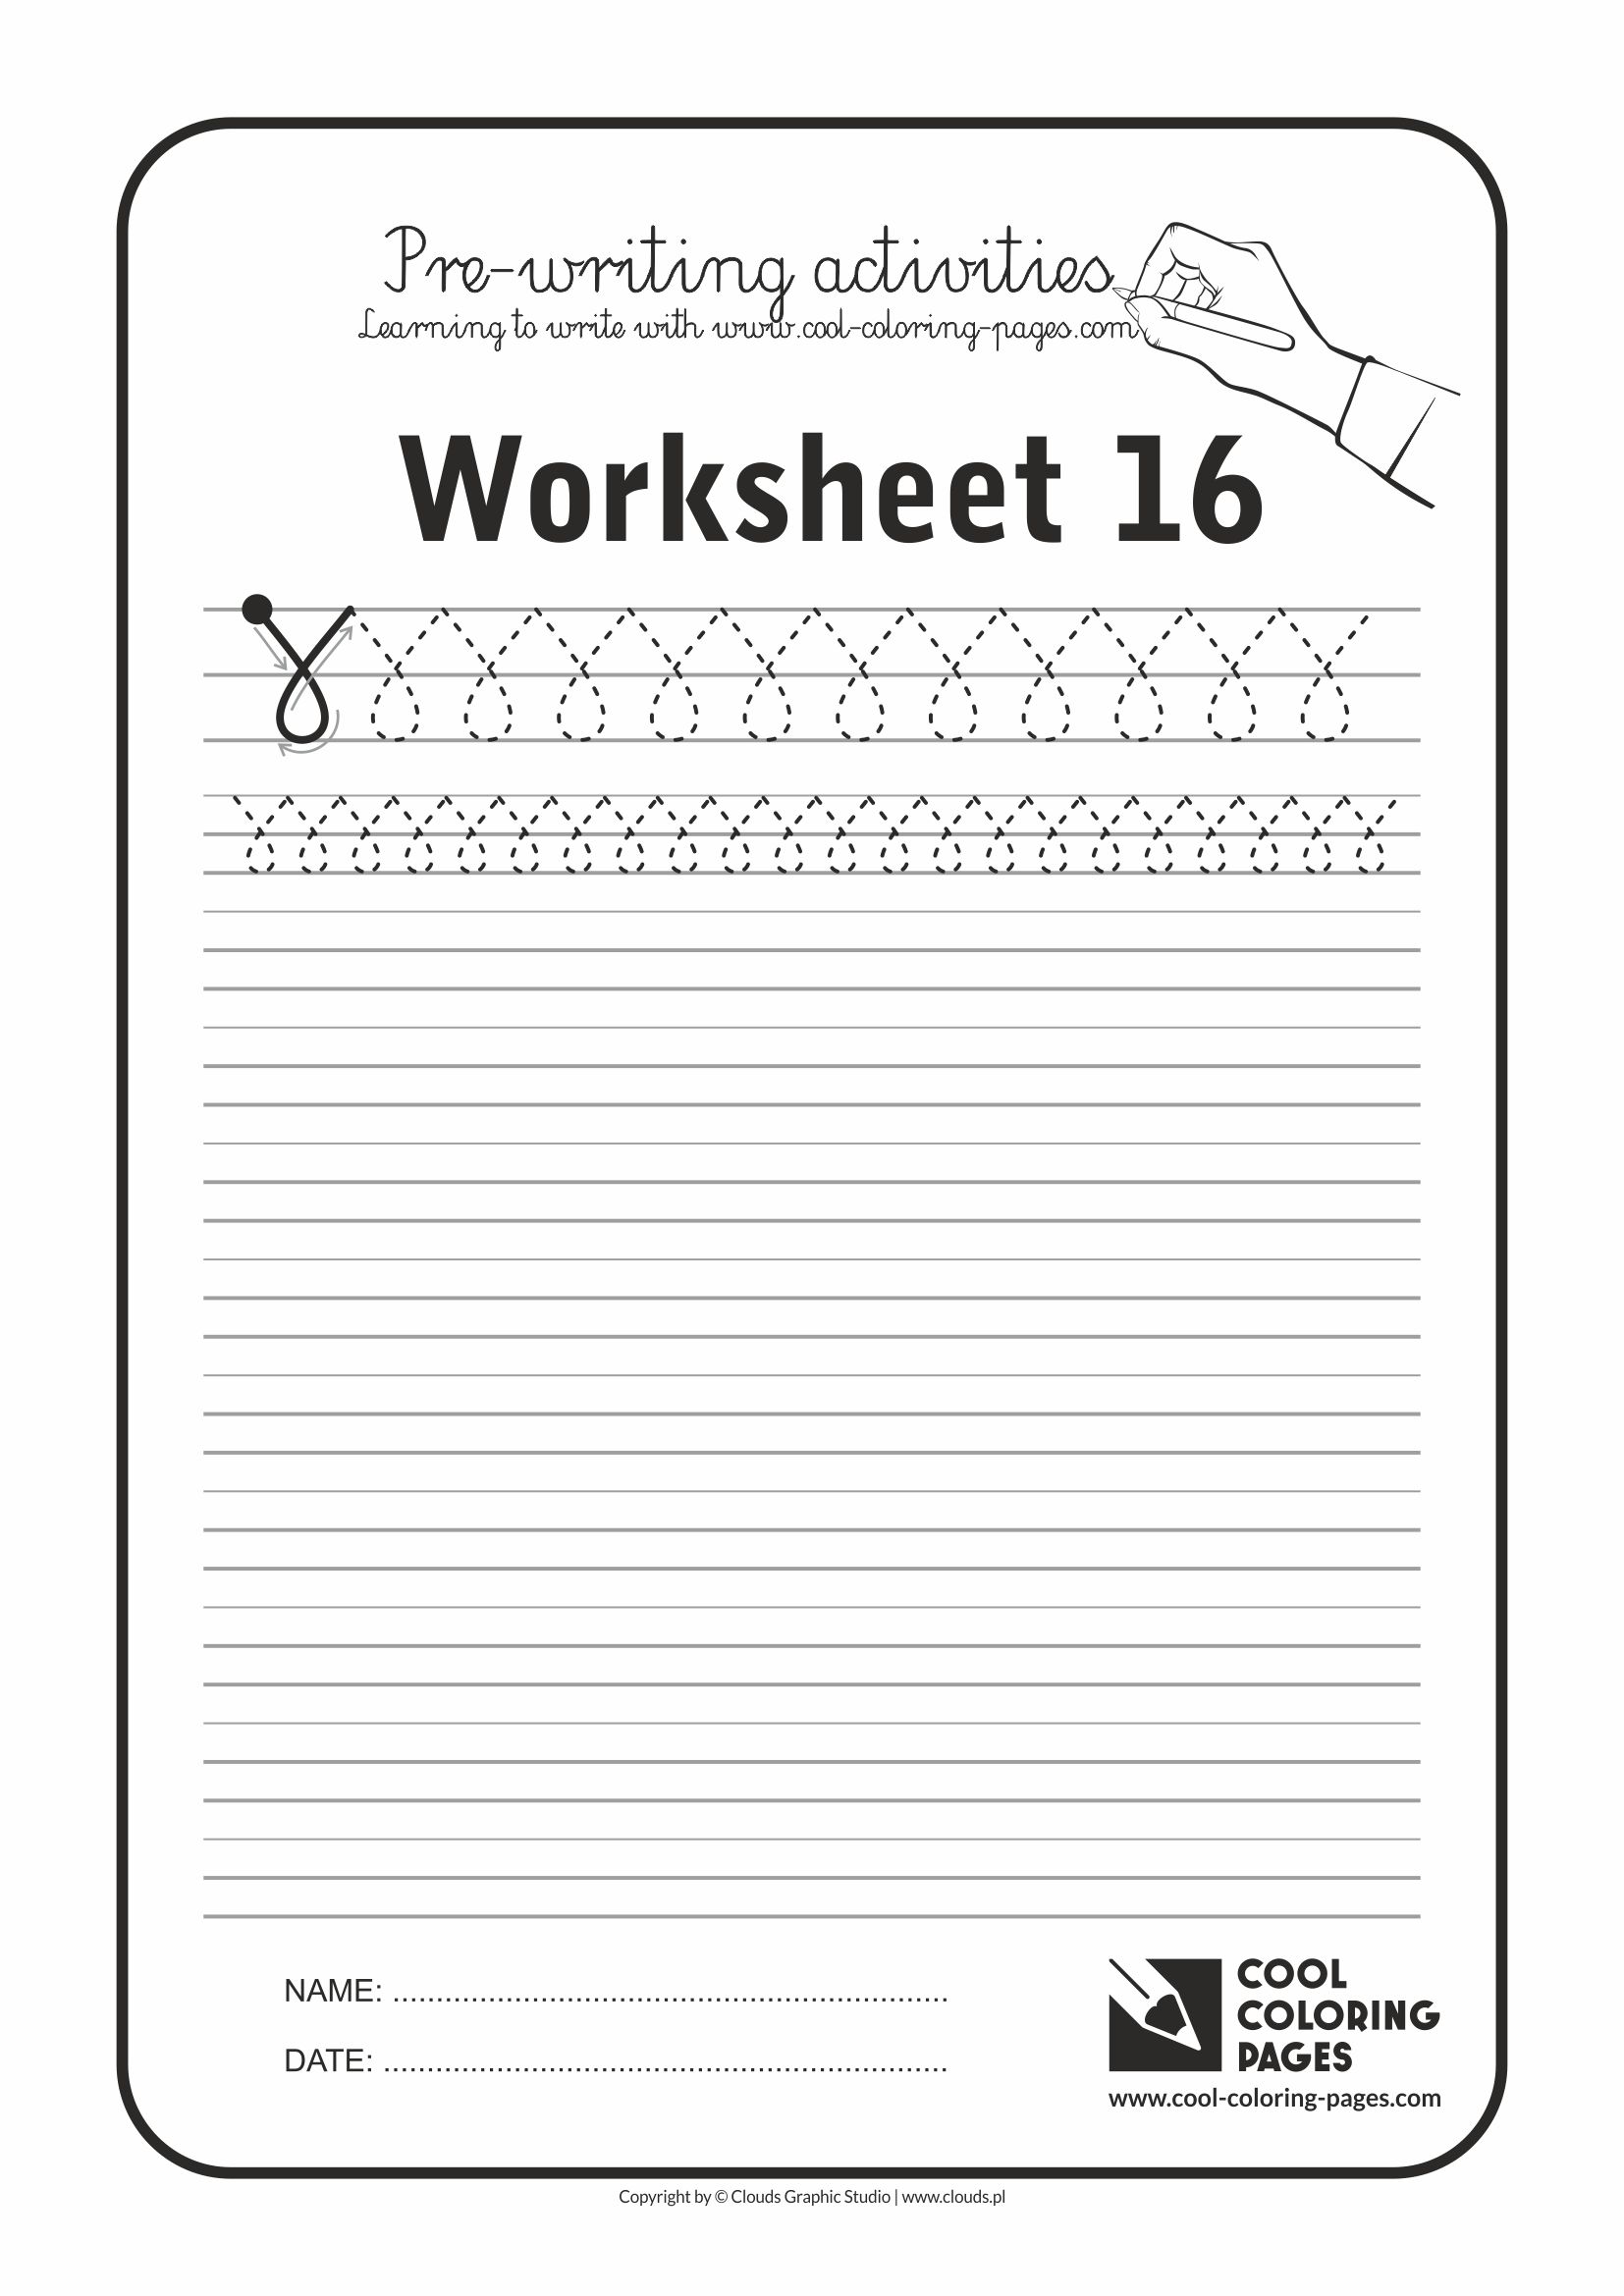 Cool Coloring Pages / Pre-writing activities / Worksheet no.16